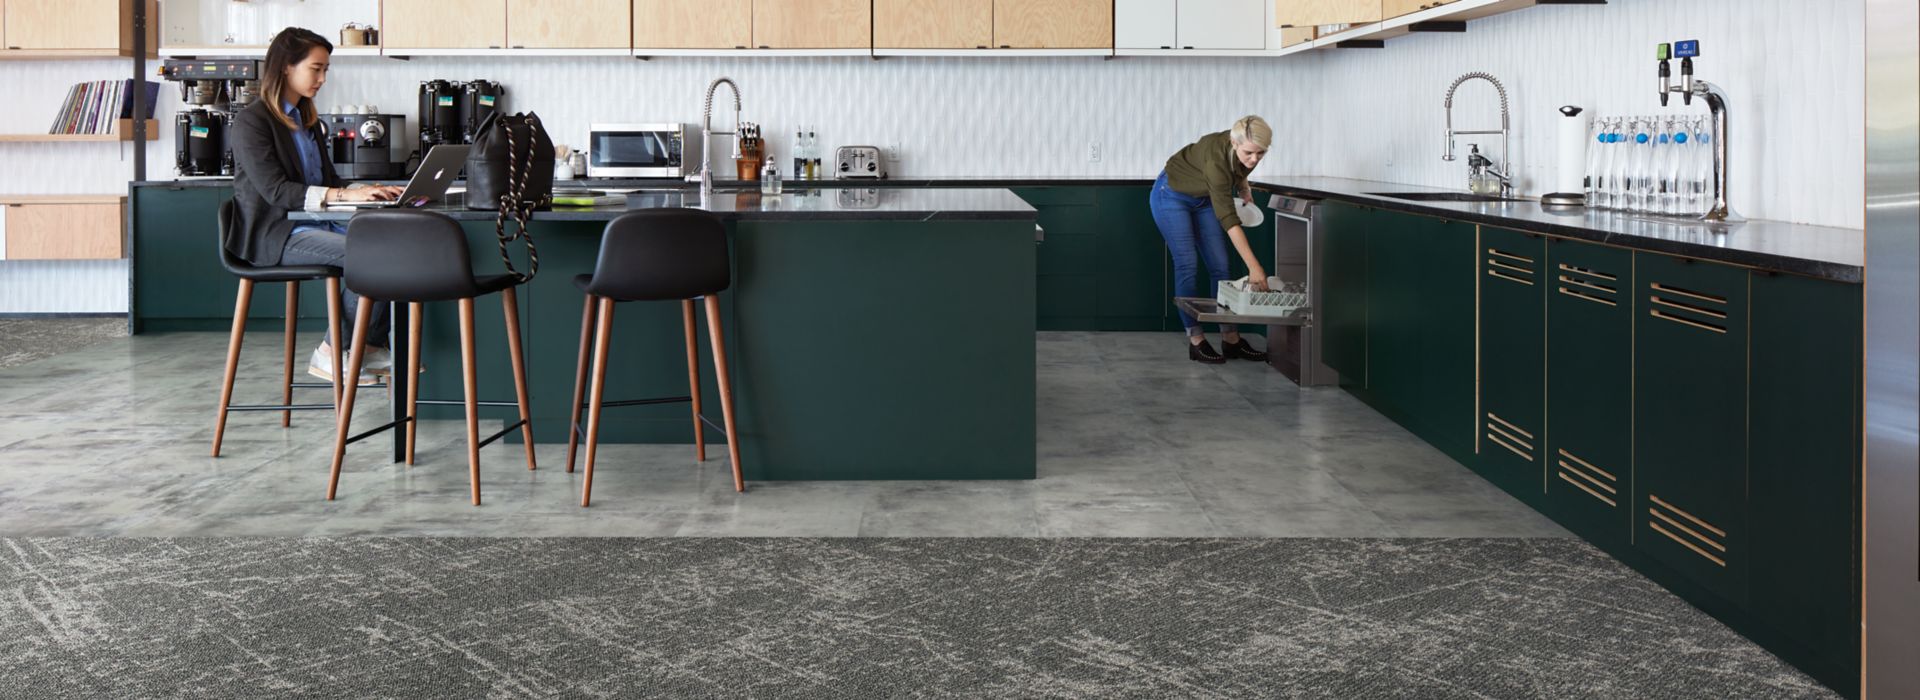 Interface Ice Breaker carpet tile and Textured Stones LVT in kitchen area with women lodaing dish washer and women working on computer